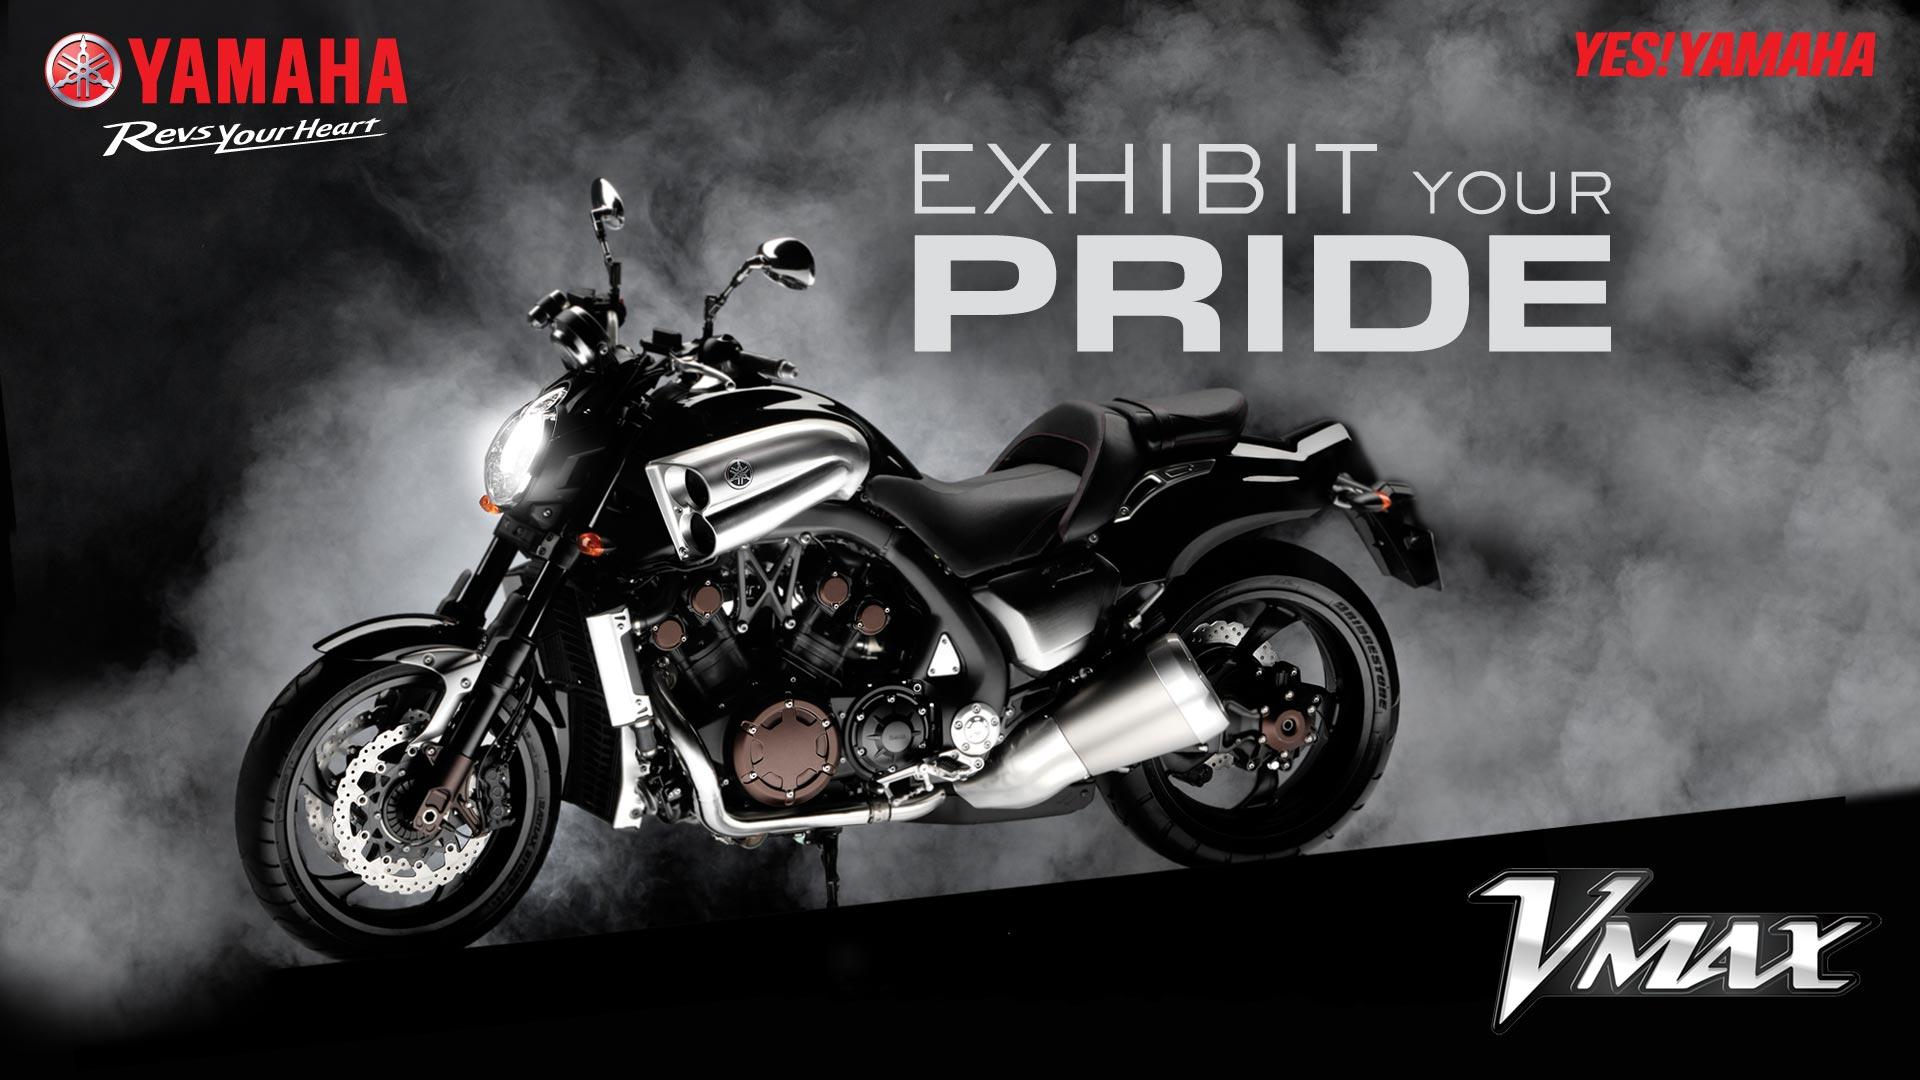 Yamaha Vmax Bike Review, Specification, Mileage and Price